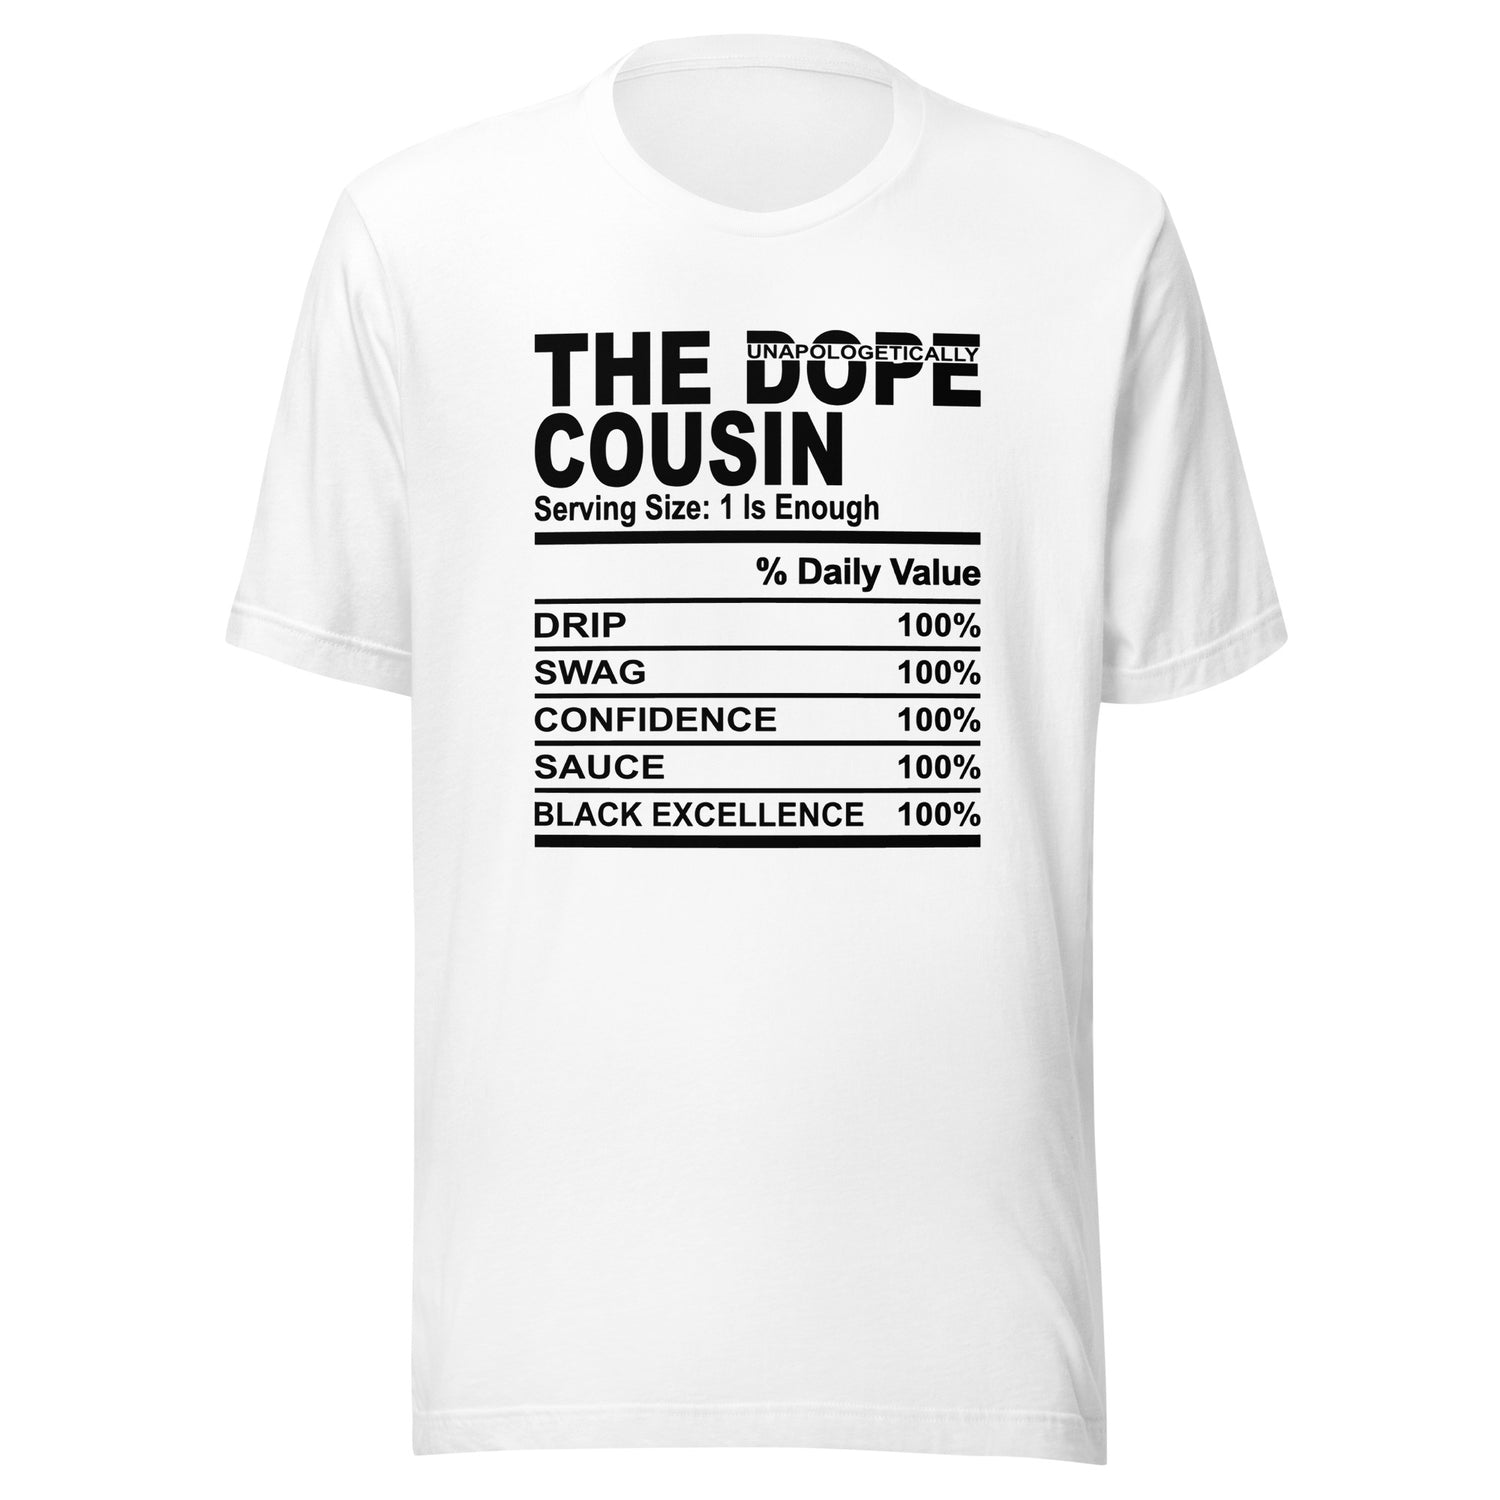 Dope (Unapologetically) Cousin Tees